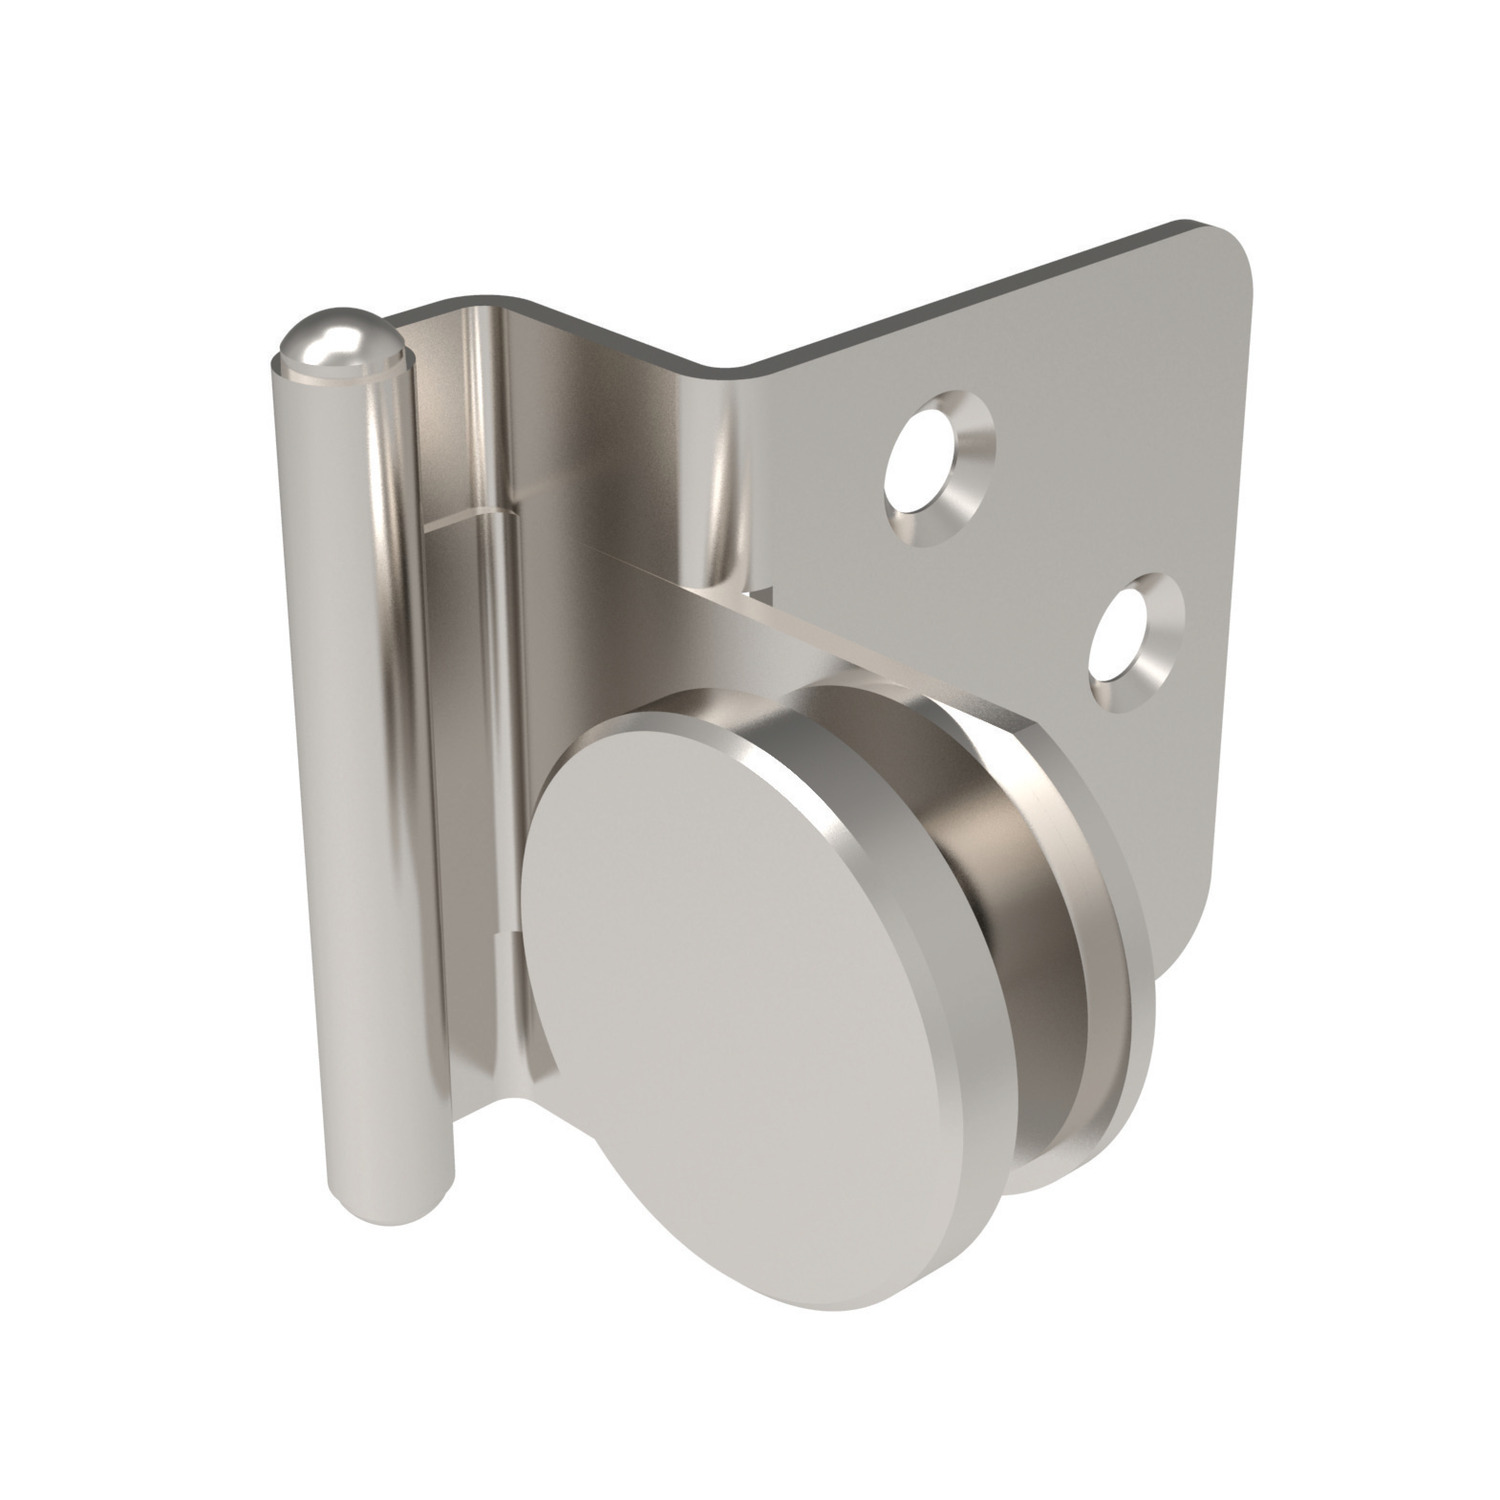 Glass Door Hinges - Half Overlay Type Polished stainless steel (AISI 304) with half overlay design, suitable for door thicknesses 4 - 6 mm. Drilling is needed for fitting.